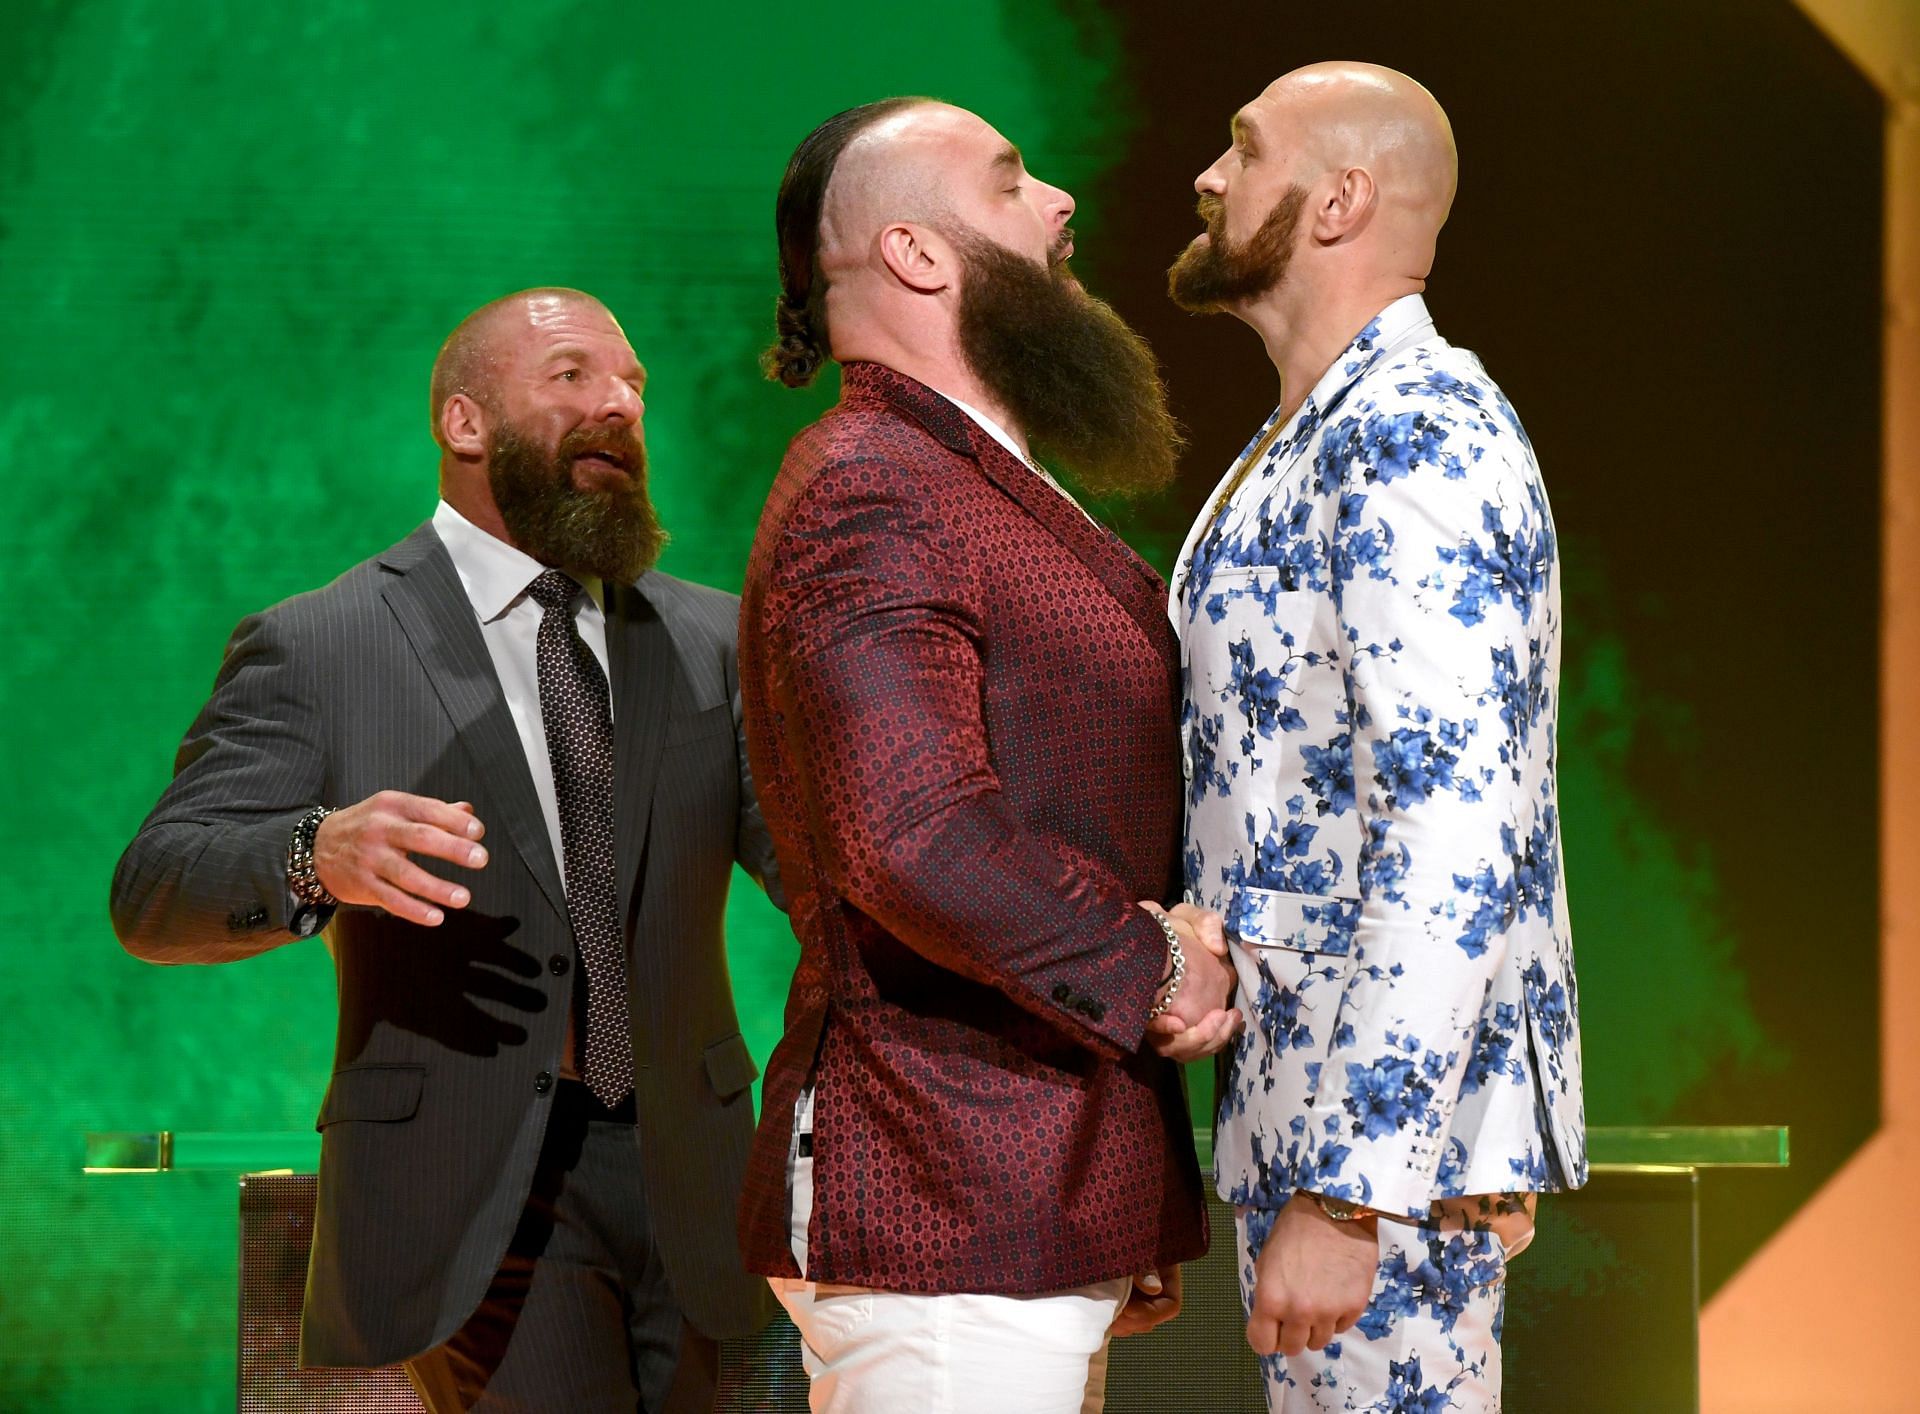 WWE announces matches with Tyson Fury and Cain Velasquez at Crown Jewel